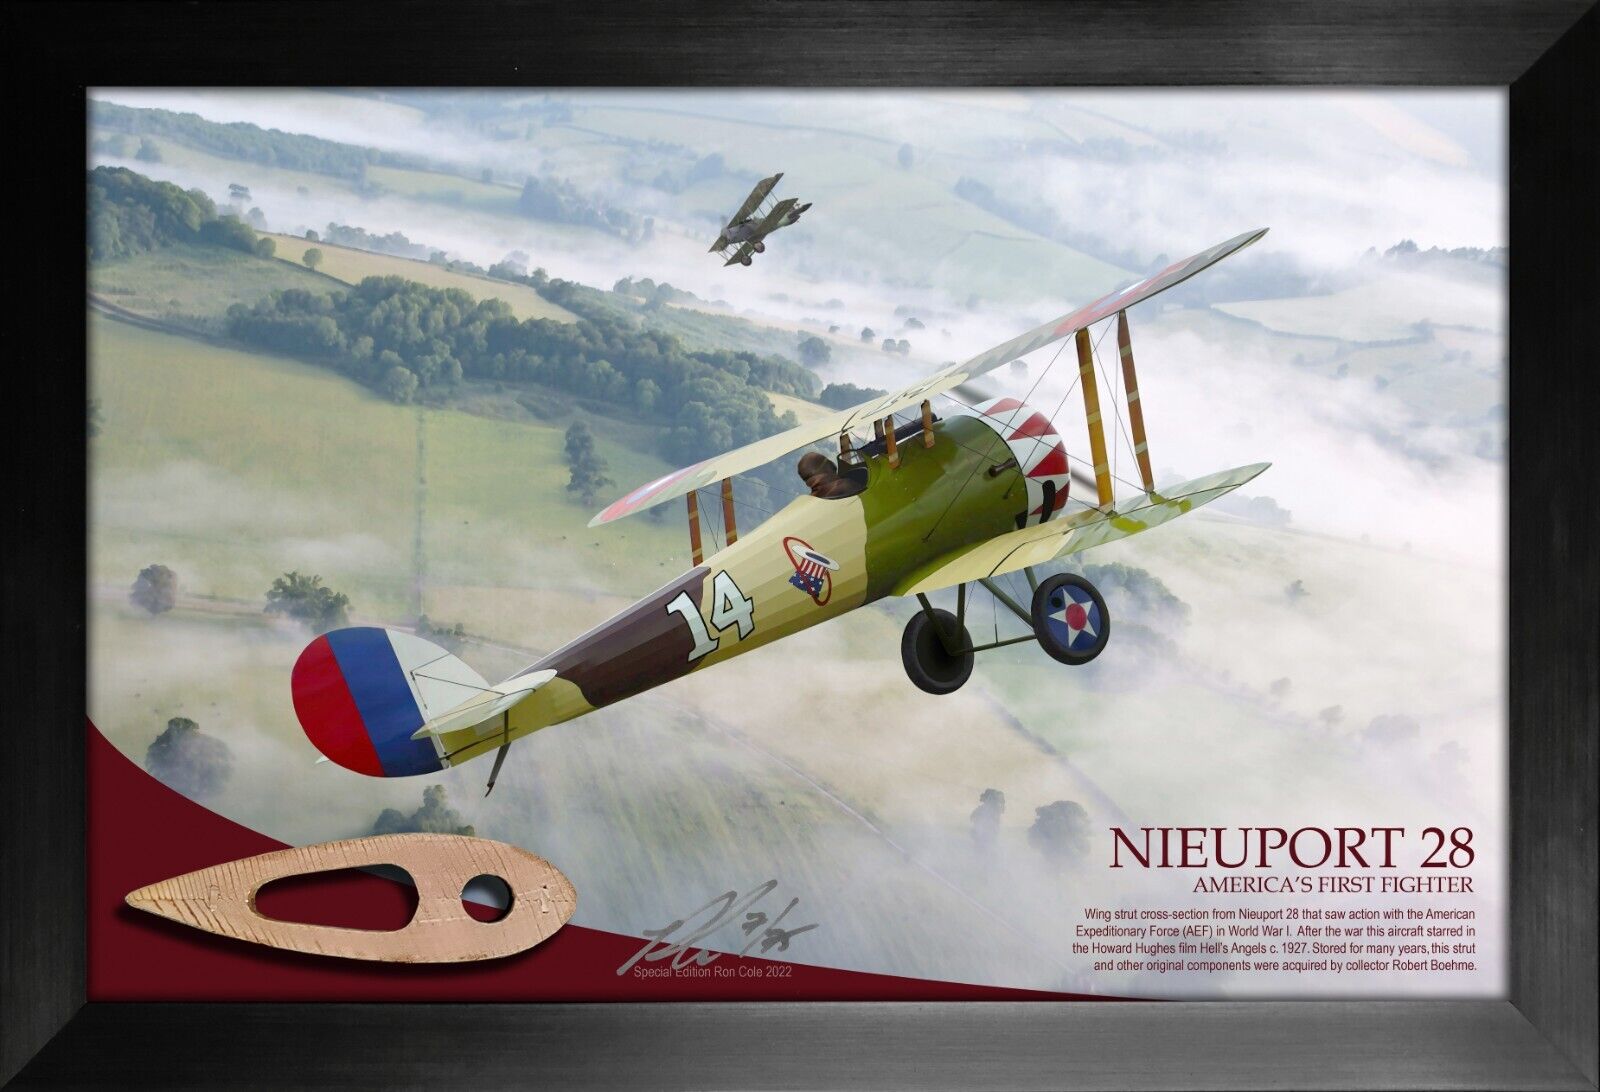  Nieuport 28 AEF Wing Strut Cross Section Relic Display by Ron Cole